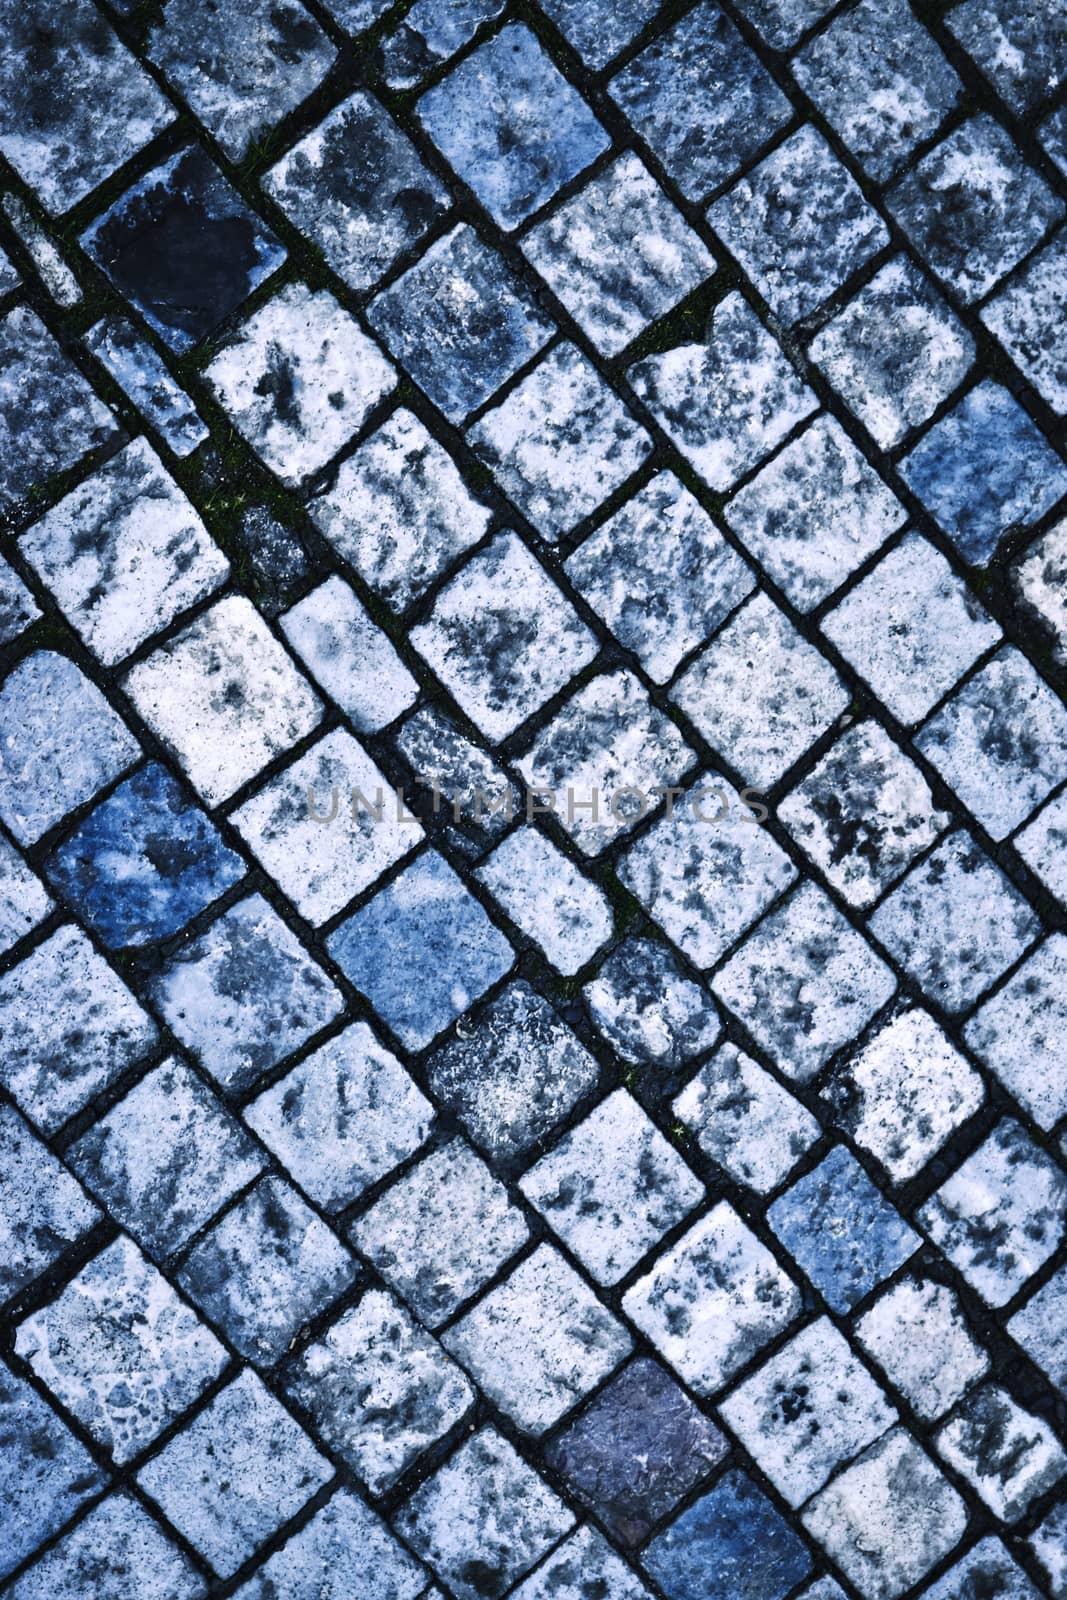 blue colored stone paving blocks by Ahojdoma